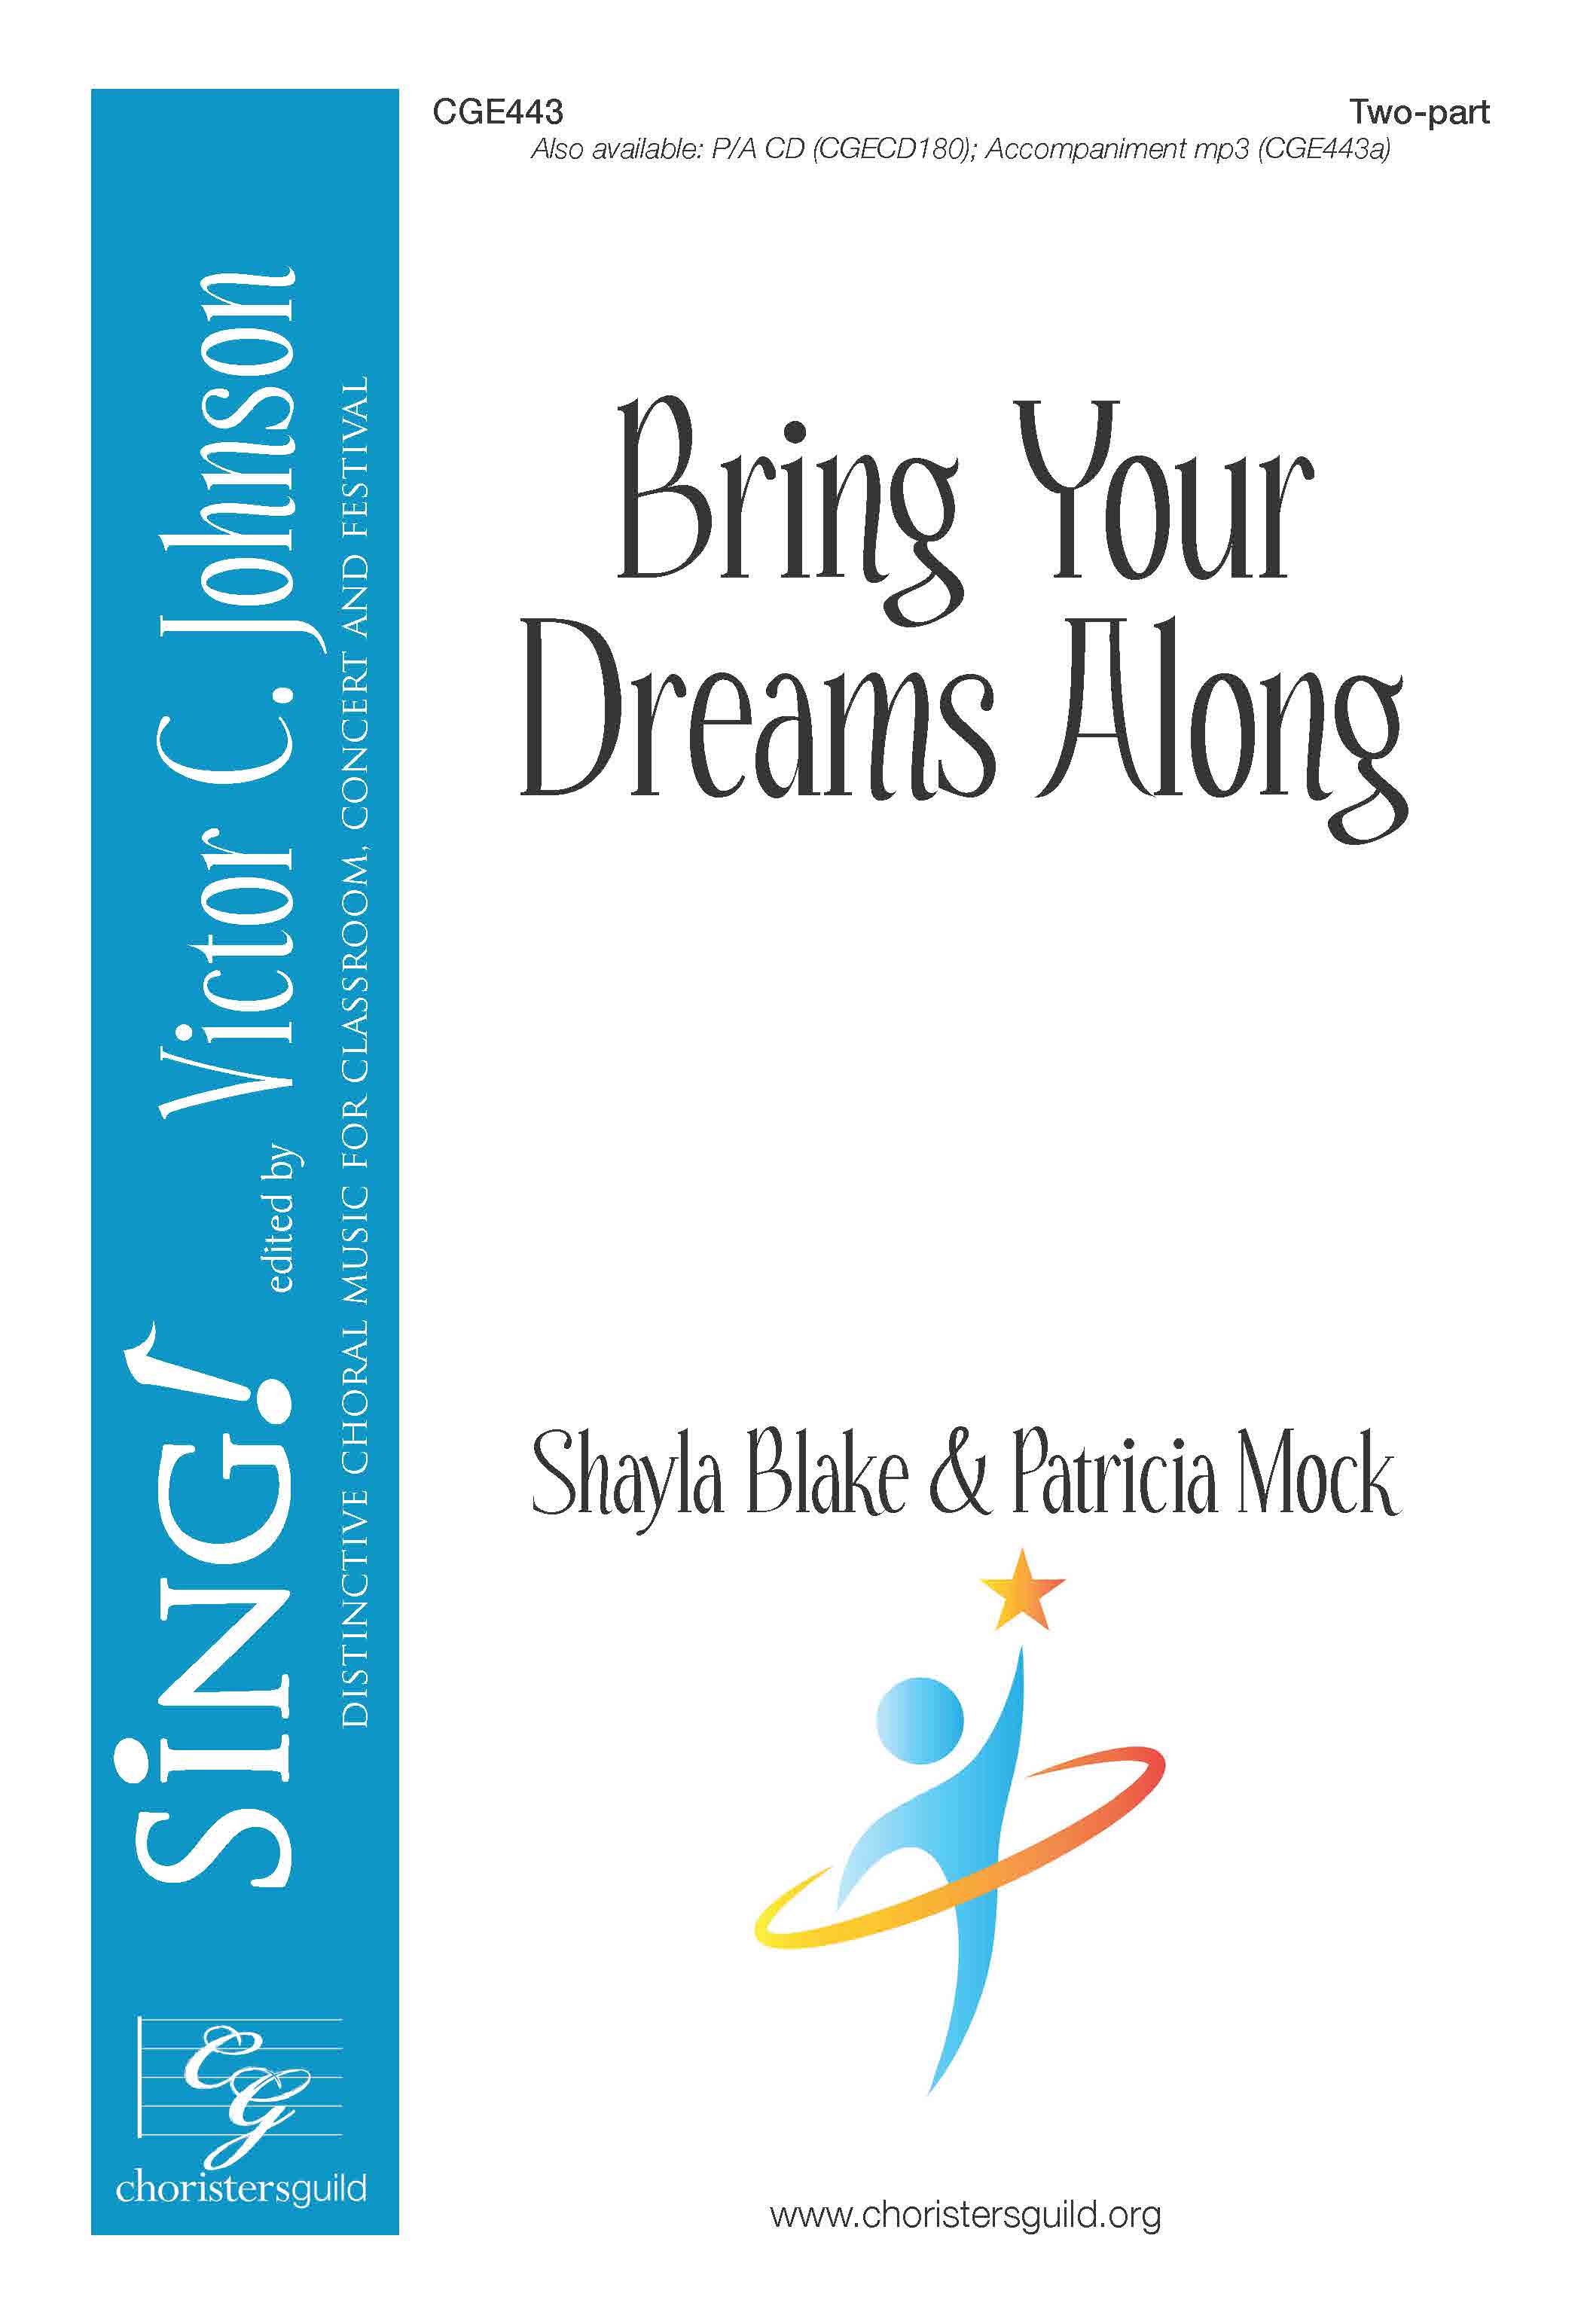 Bring Your Dreams Along - Two-part